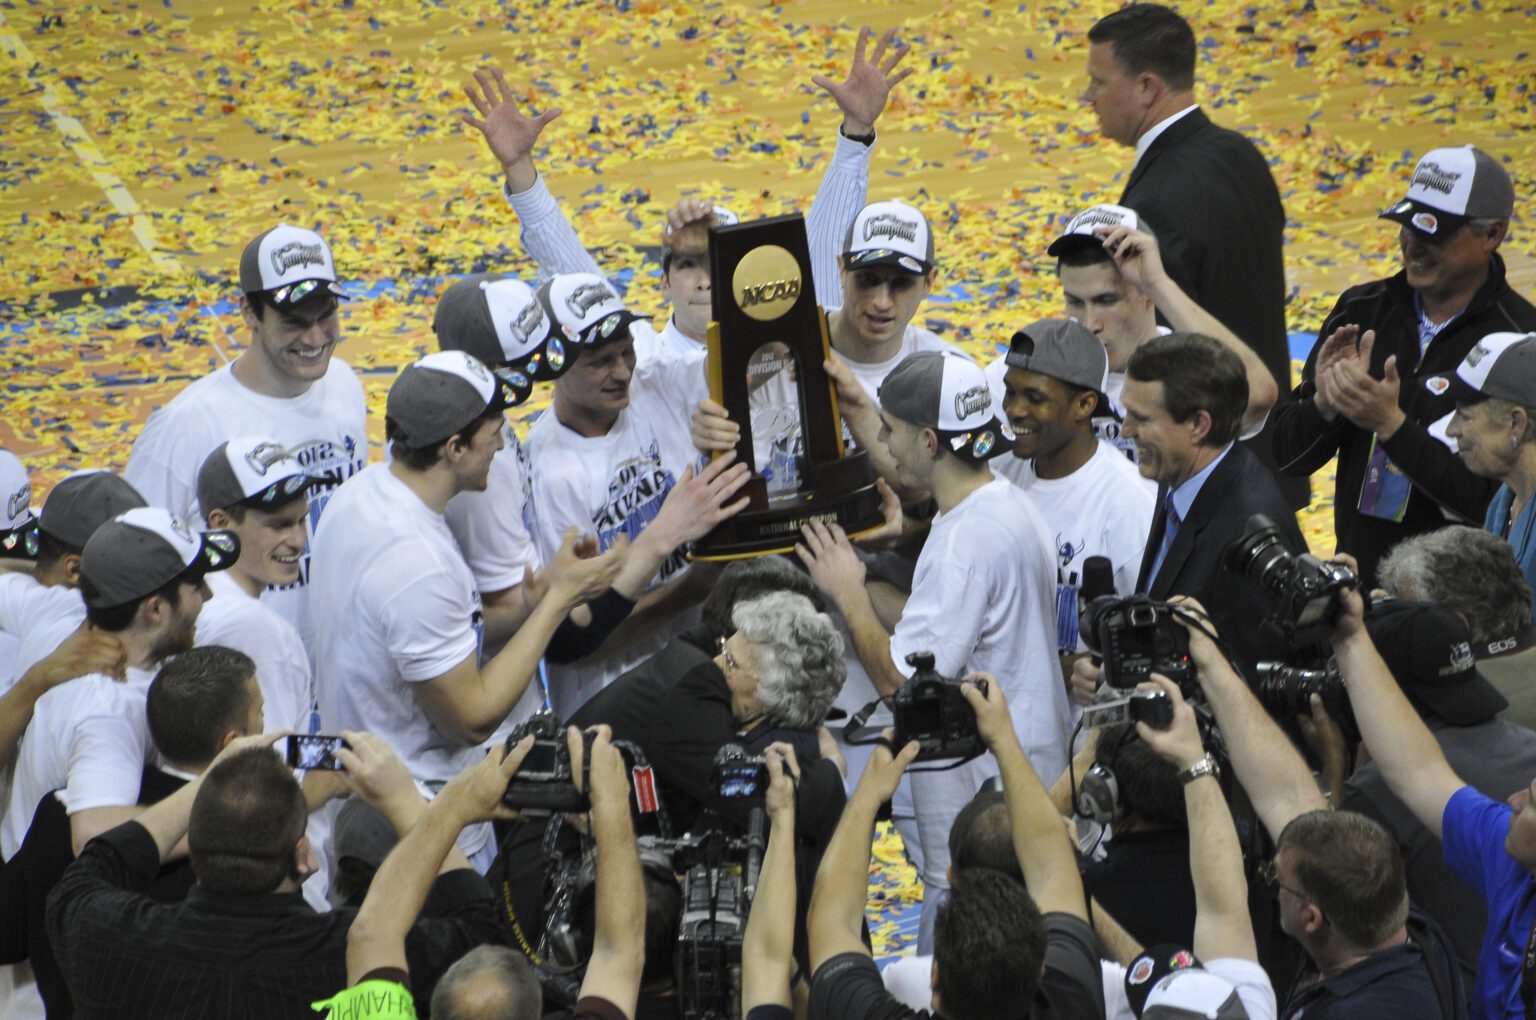 The Western men's basketball team celebrates on the court after winning the 2012 Division II national championship.